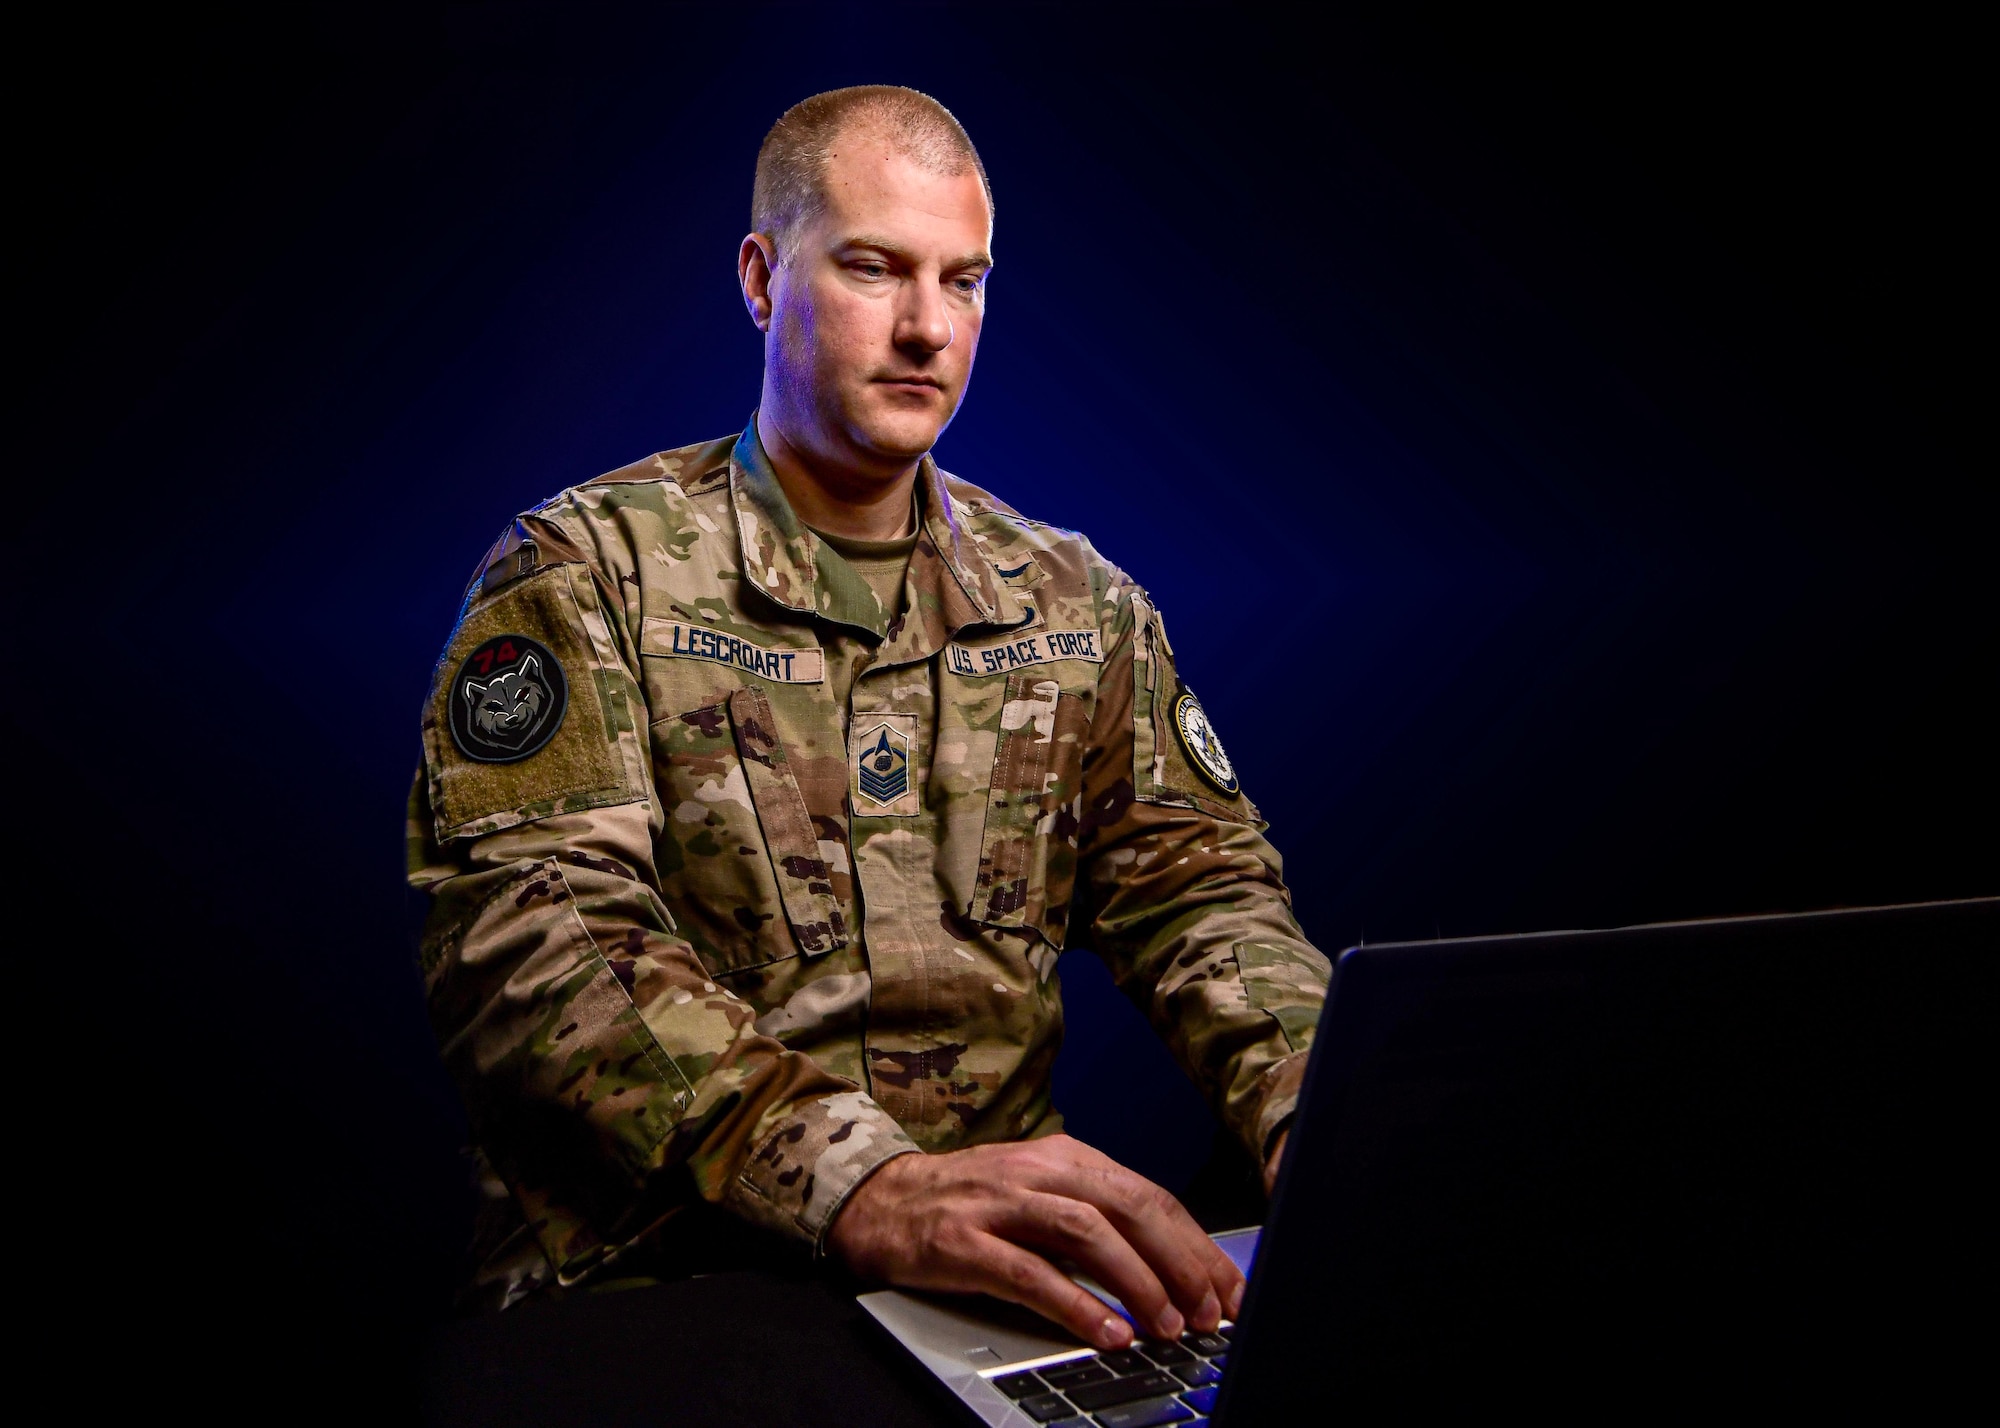 U.S. Space Force Master Sgt. Stephen Lescroart poses for a photo with a laptop.